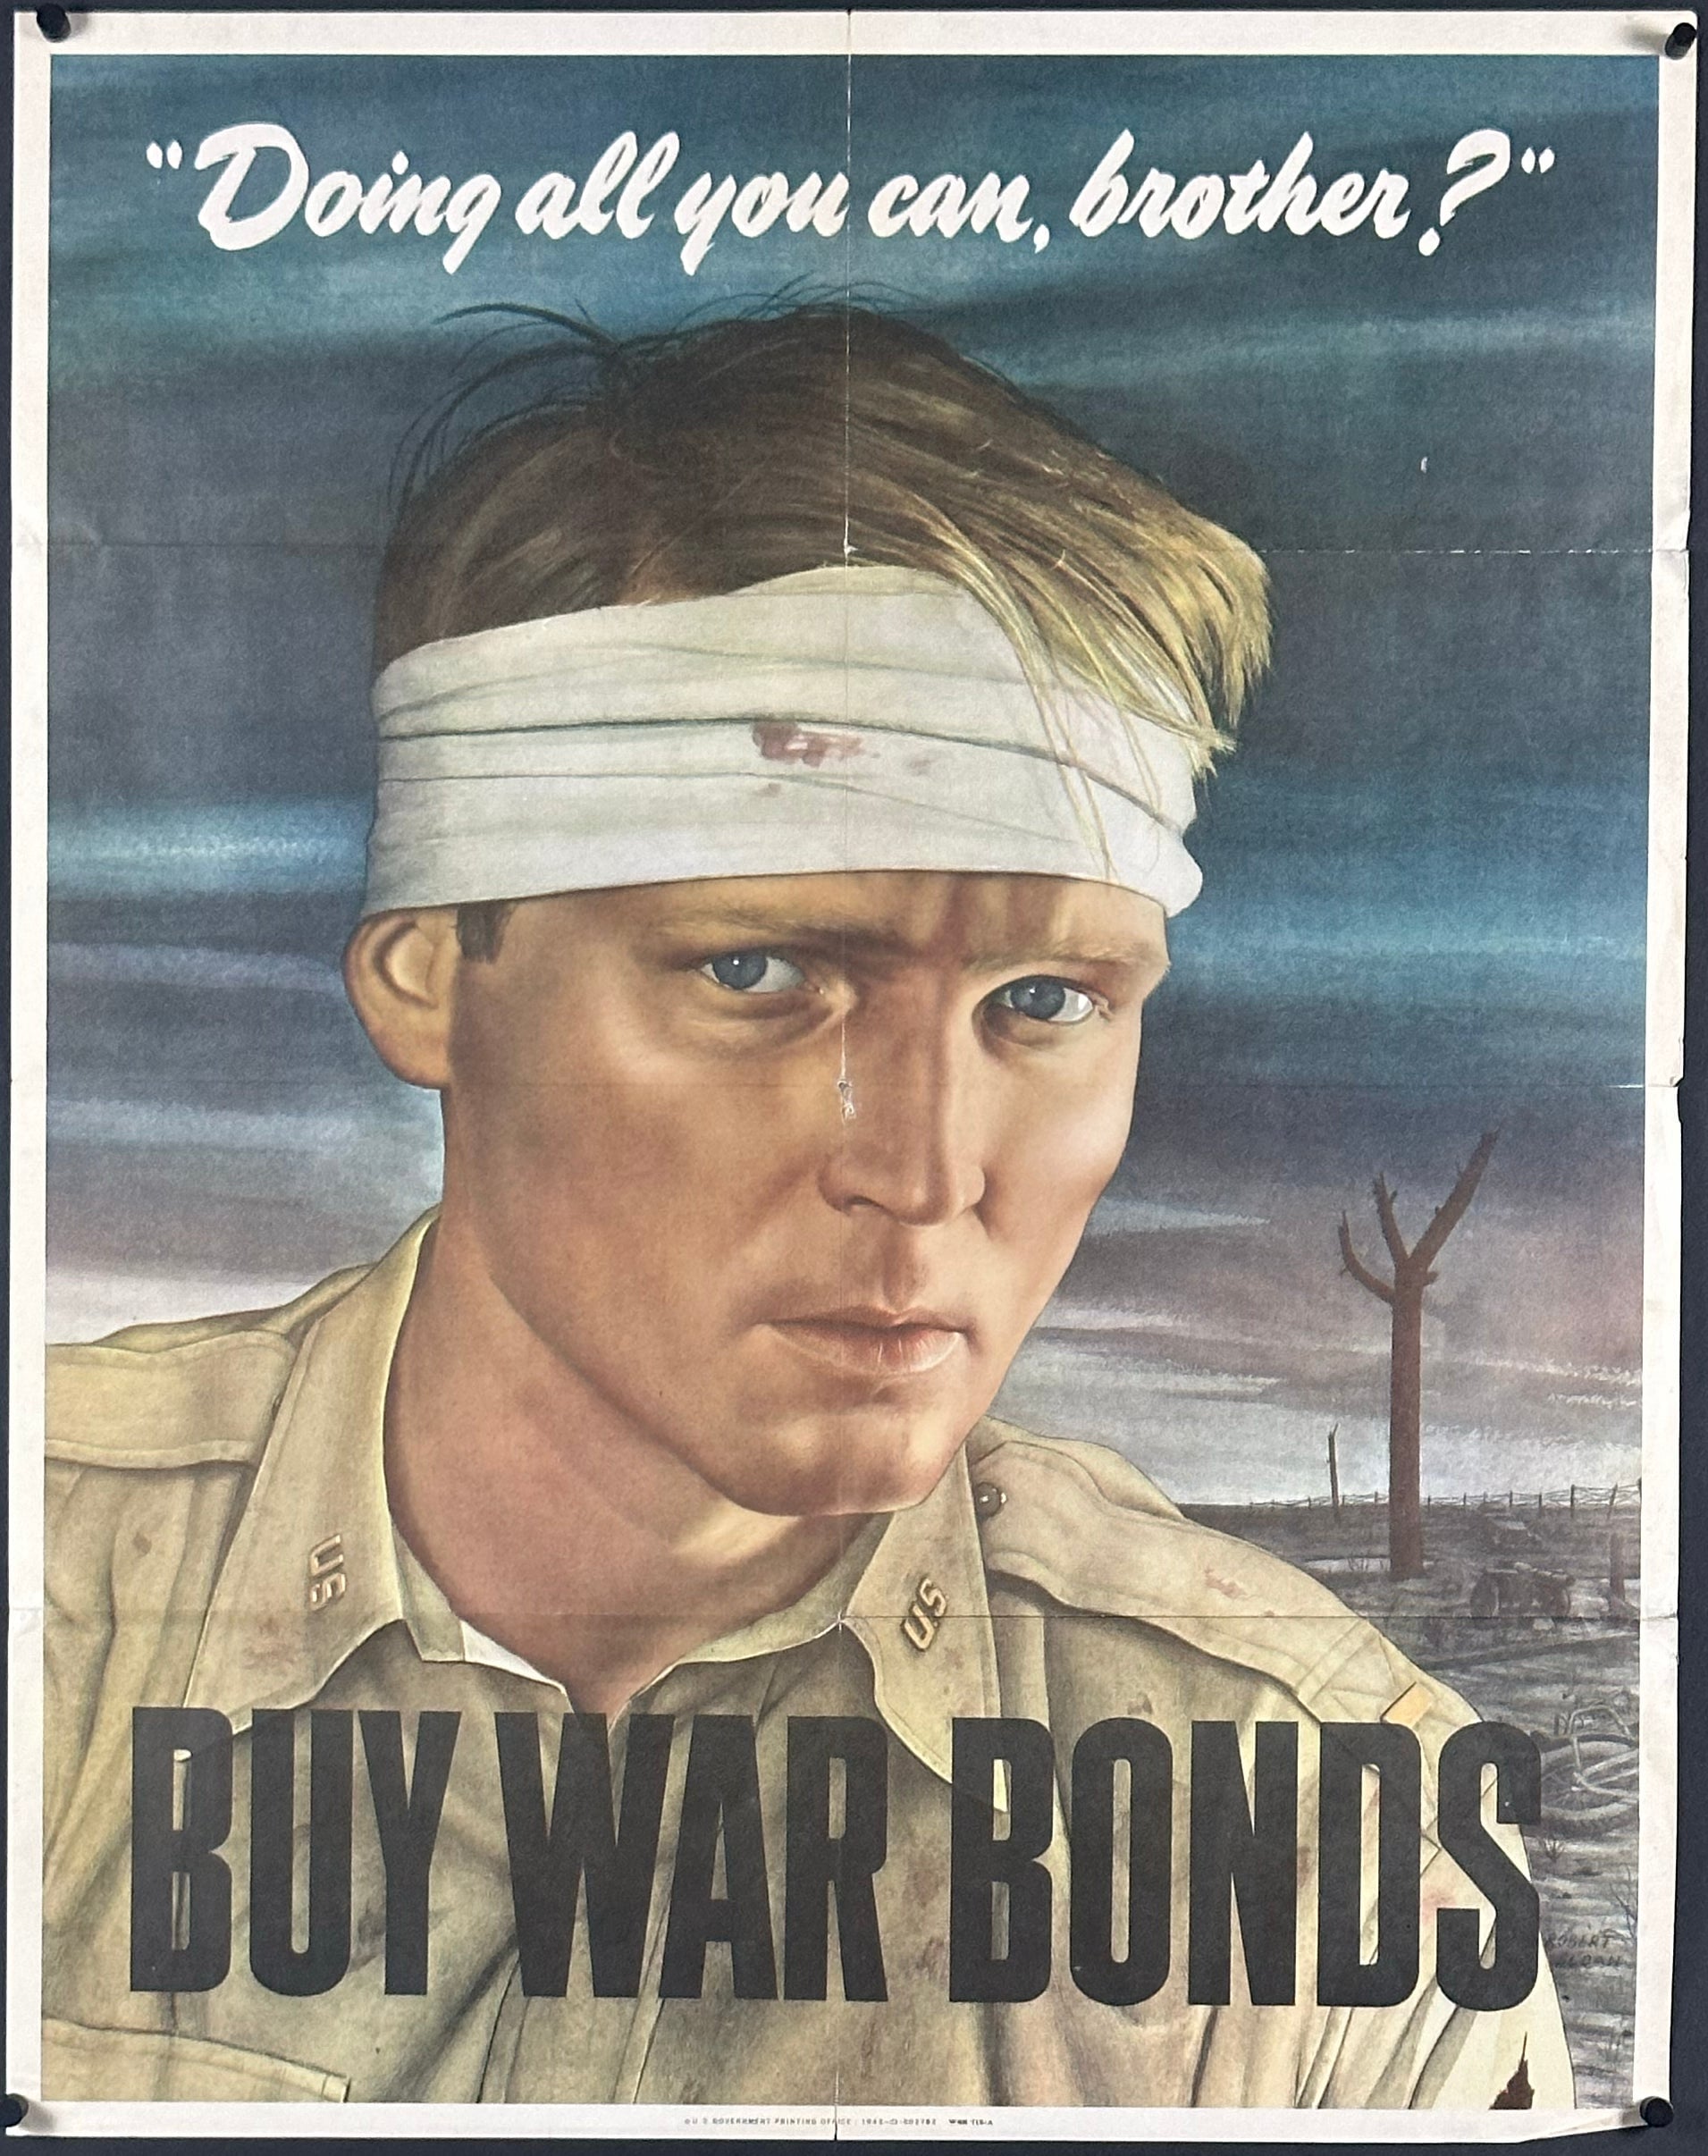 "Doing All You Can, Brother?" WWII War Bonds Poster by Robert Smullyan Sloan (1943) - posterpalace.com